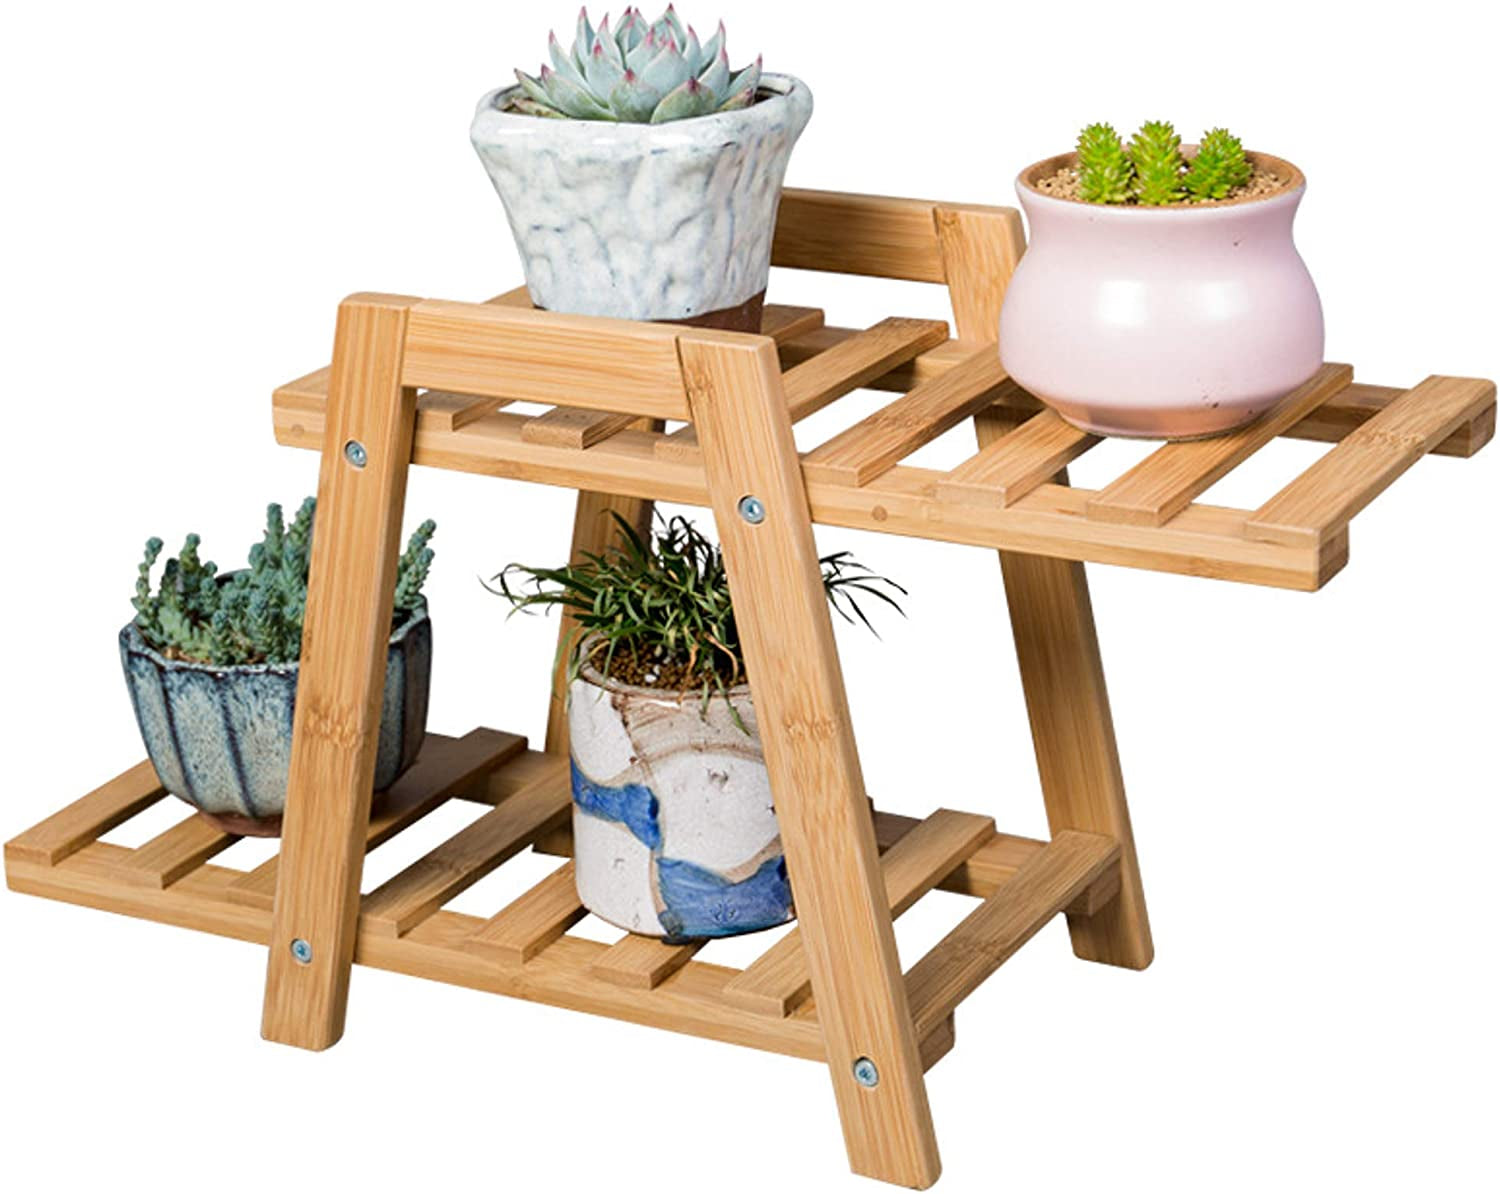 JPACO, Small Plant Stand - Bamboo 2 Tier Plant Rack & Shelf Planter for Succulents, Flowers, Rose. Great for Window Sill, Indoor, Outdoor Display on Tabletop, Work & Office Desk & Counter